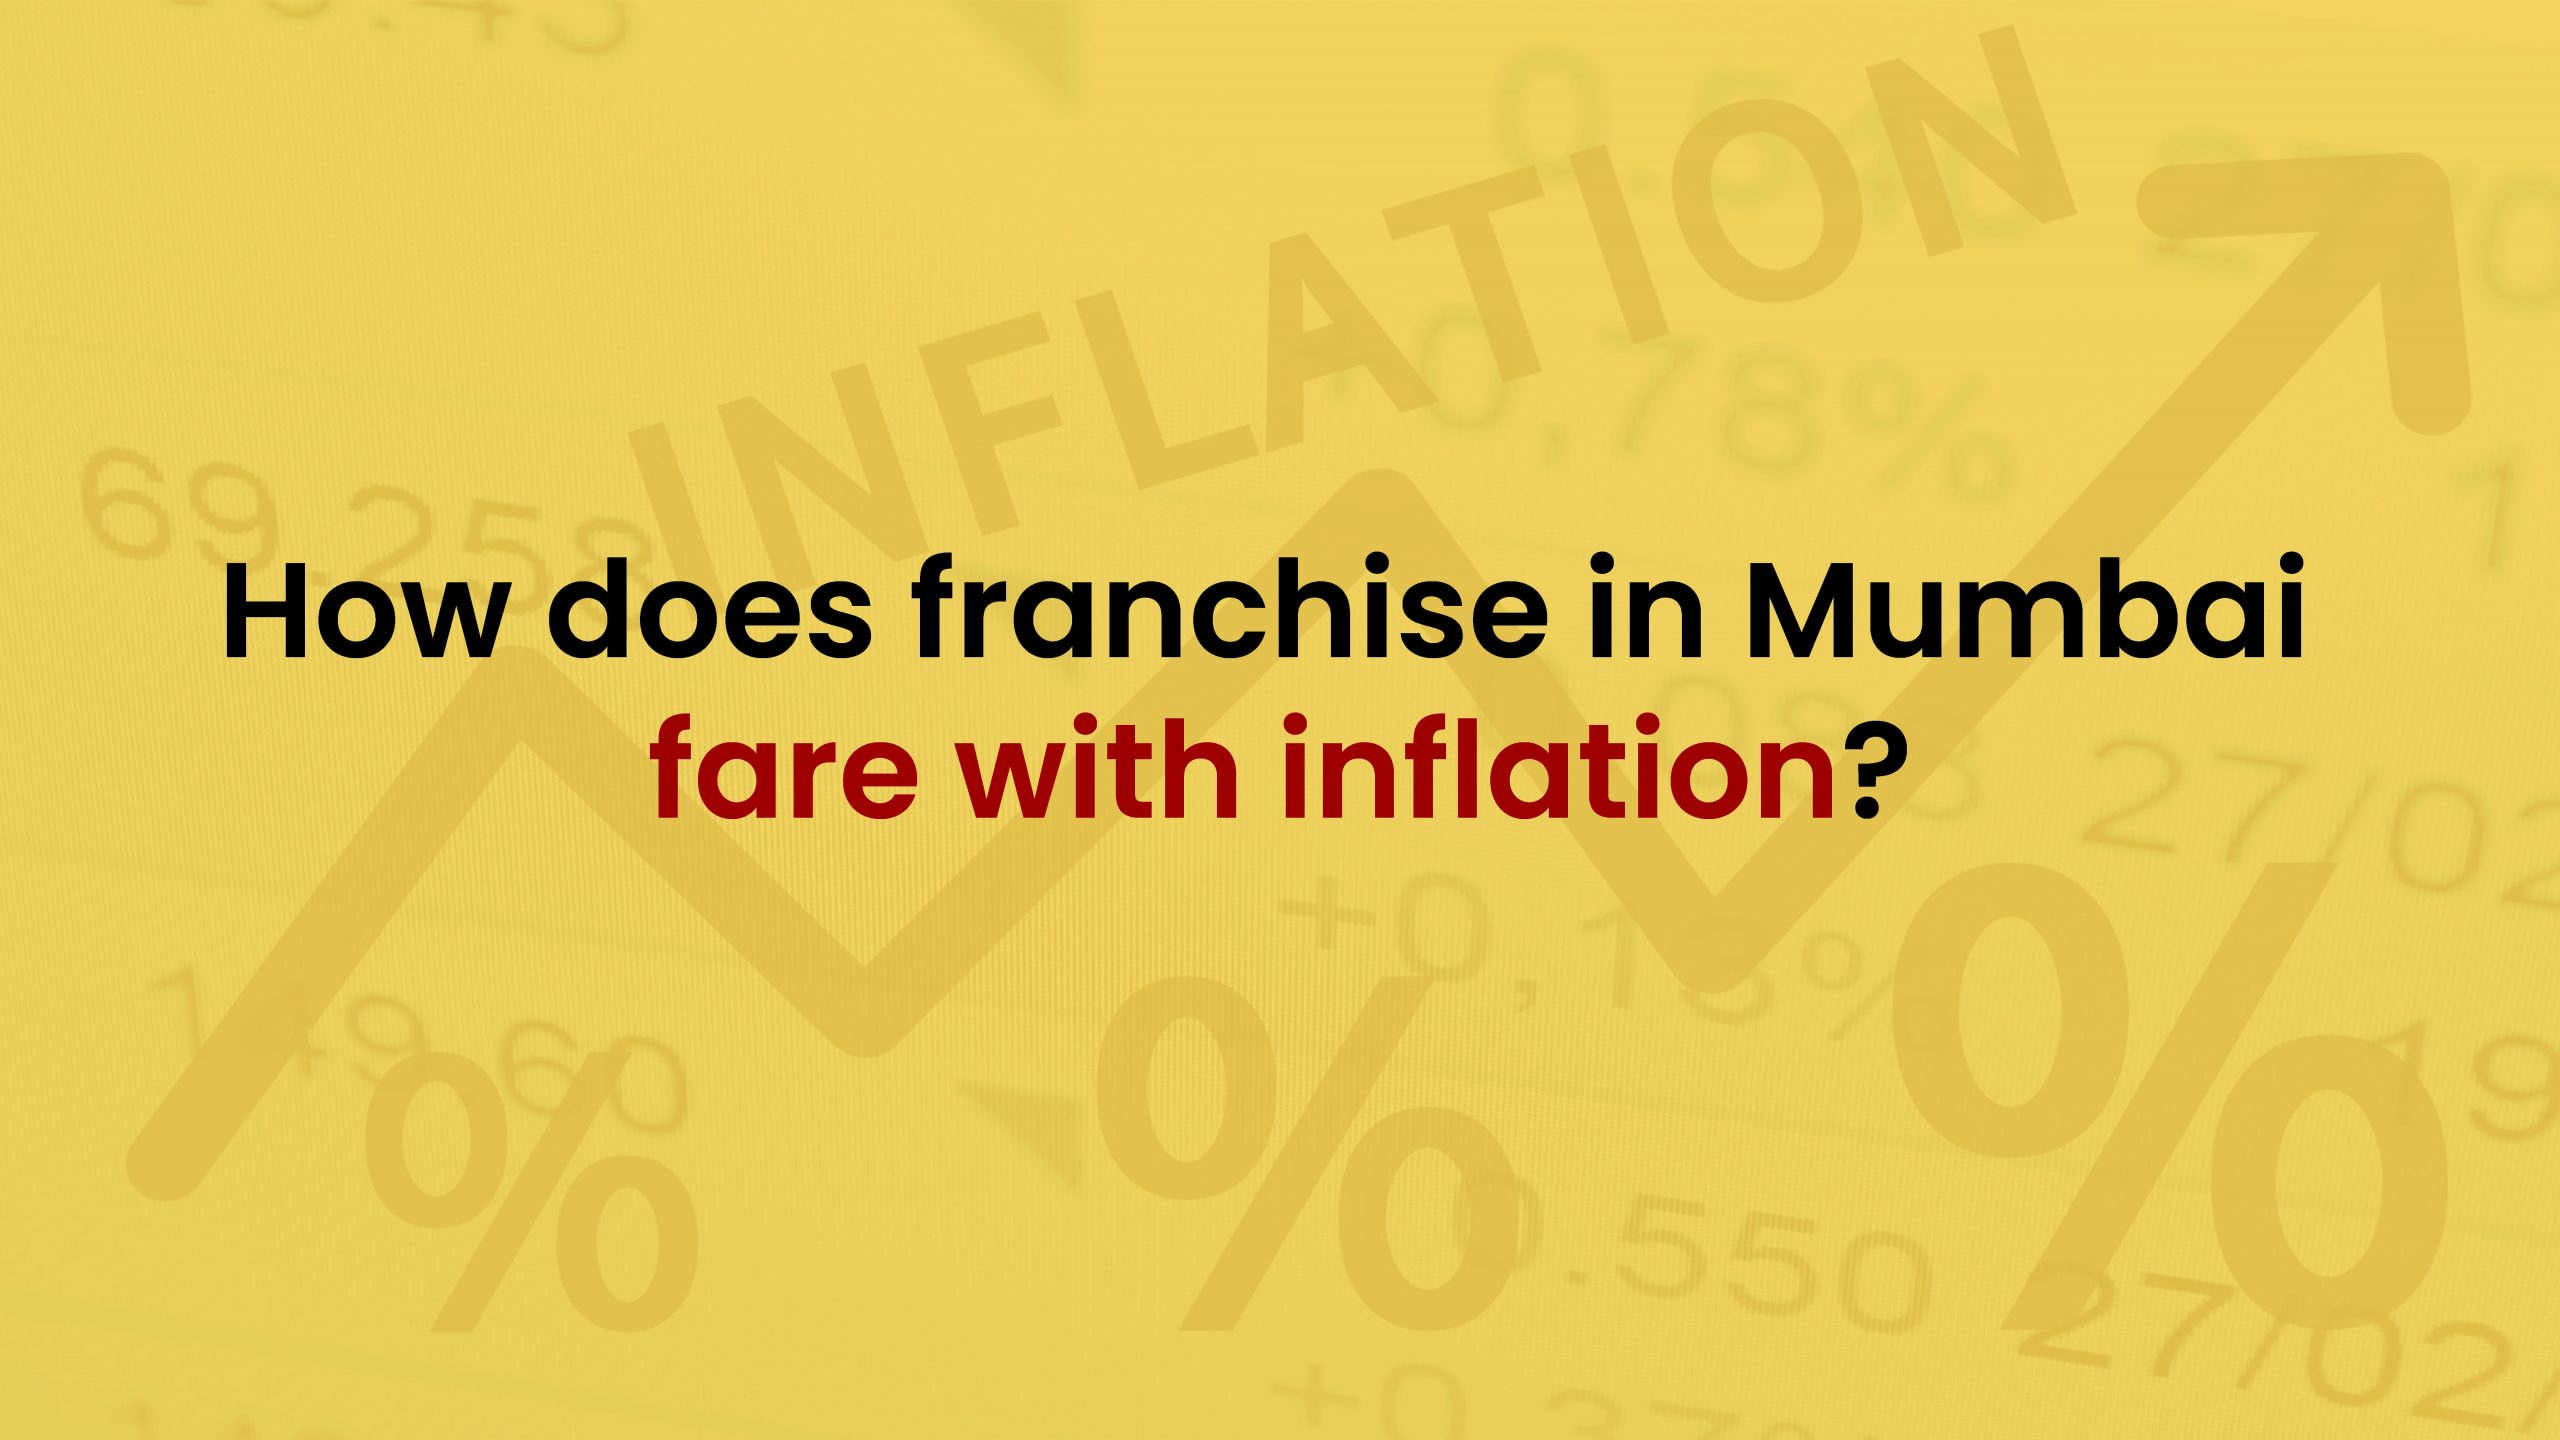 How does franchise in Mumbai fare with inflation?